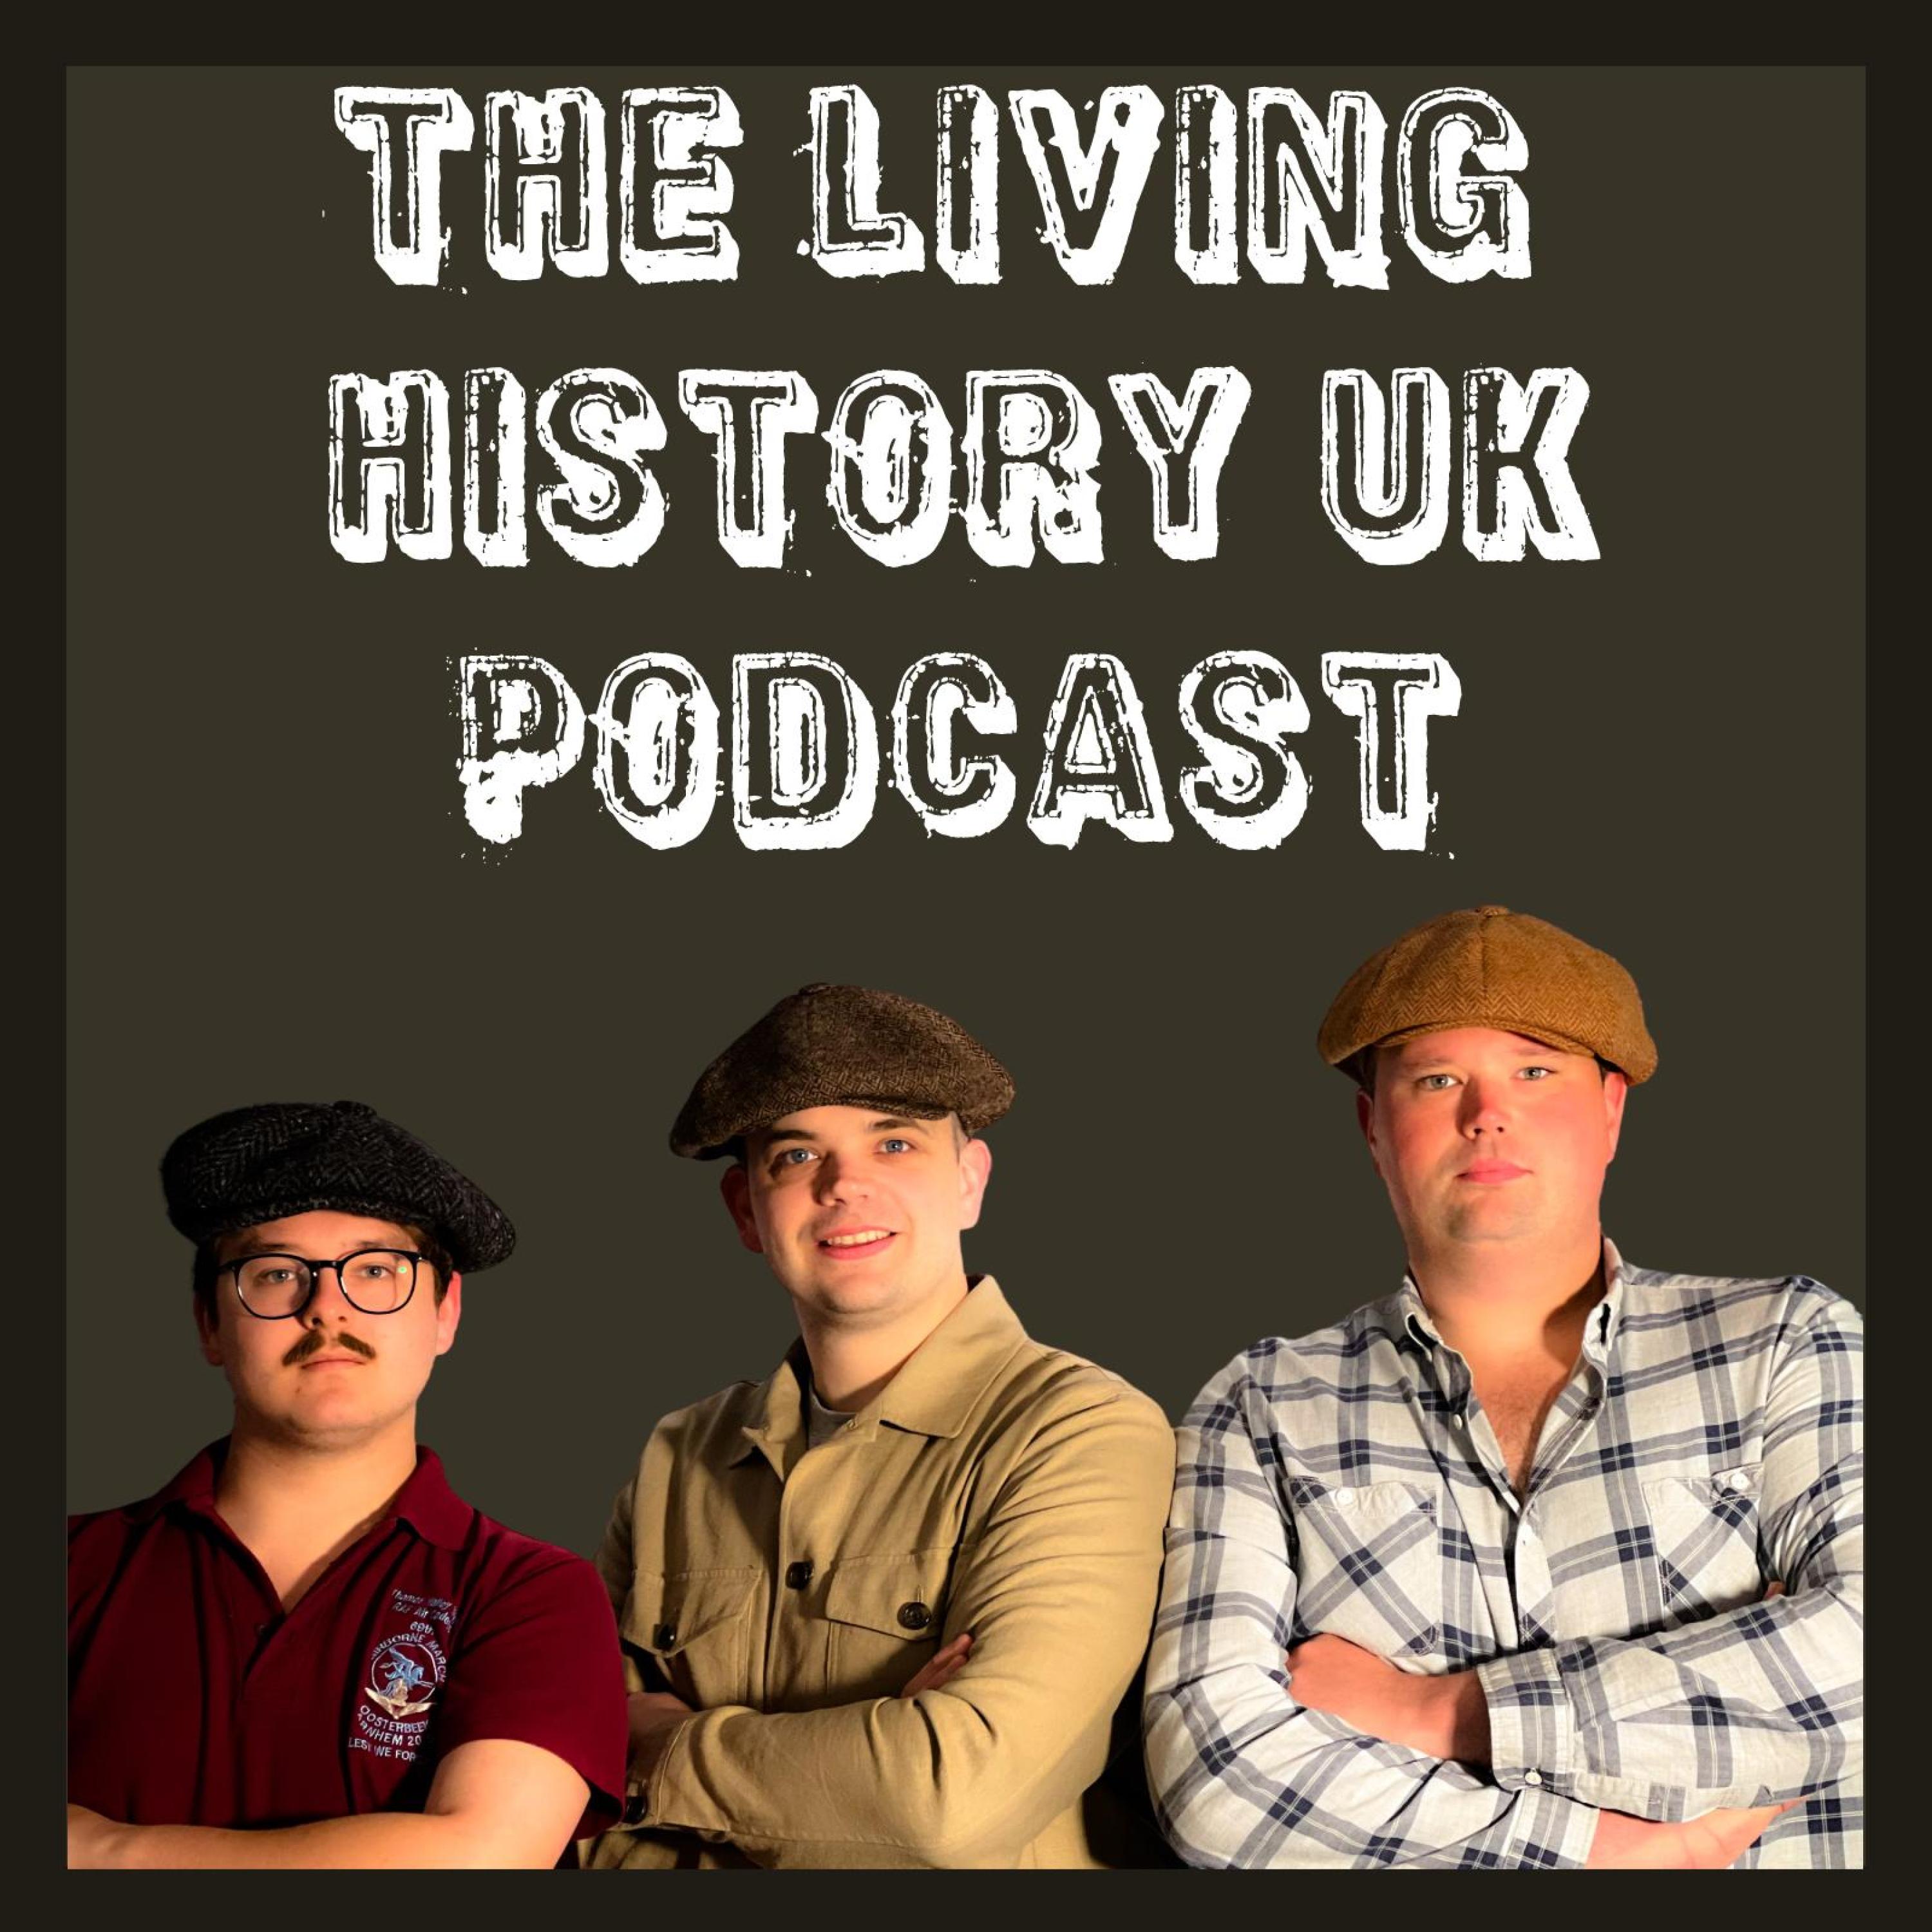 72. The English Civil War, Episode 2 - Conflict.